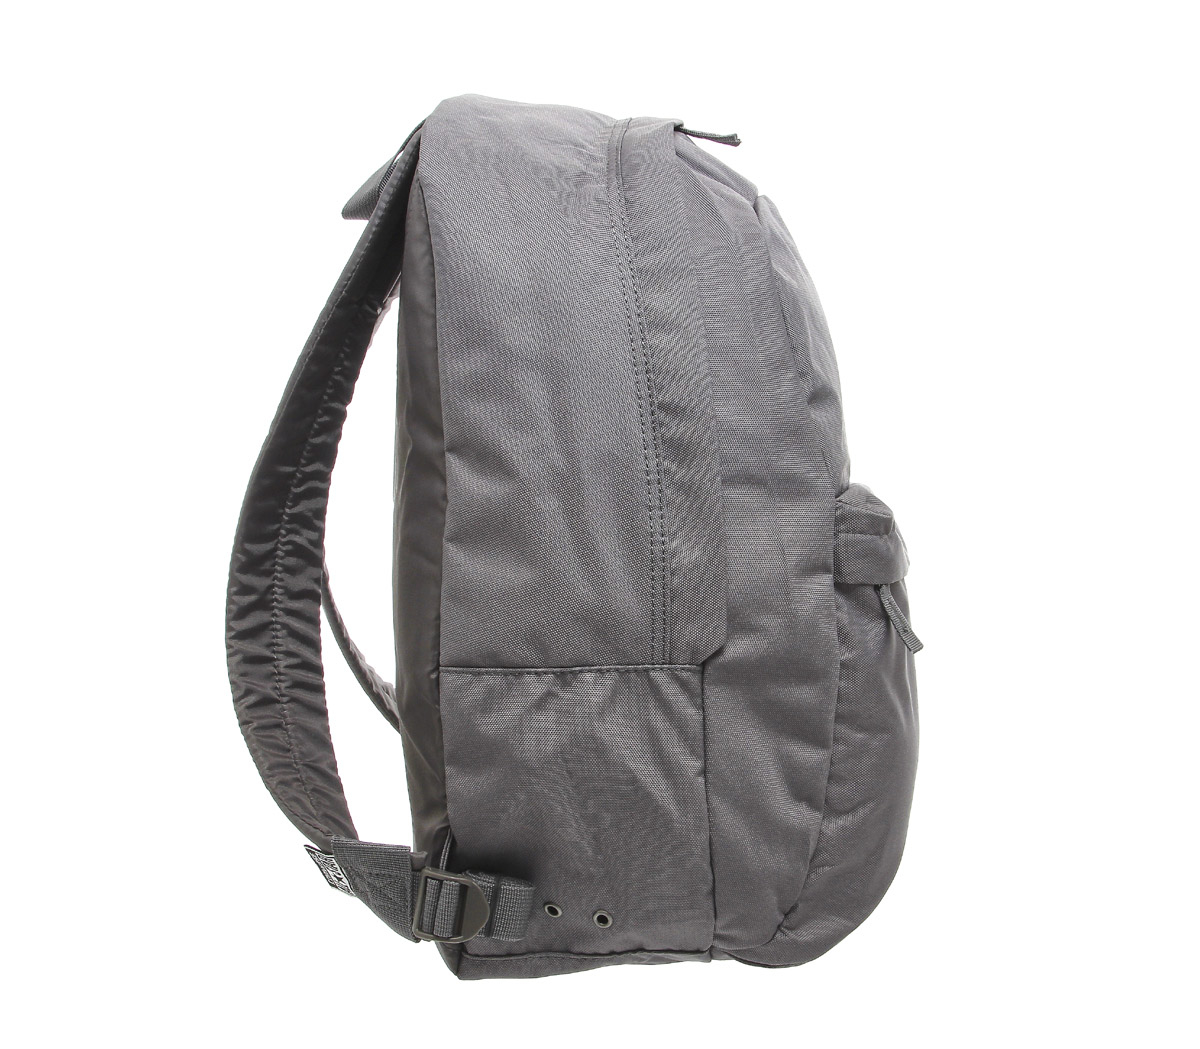 Converse Ctas Backpack in Charcoal (Gray) for Men - Lyst